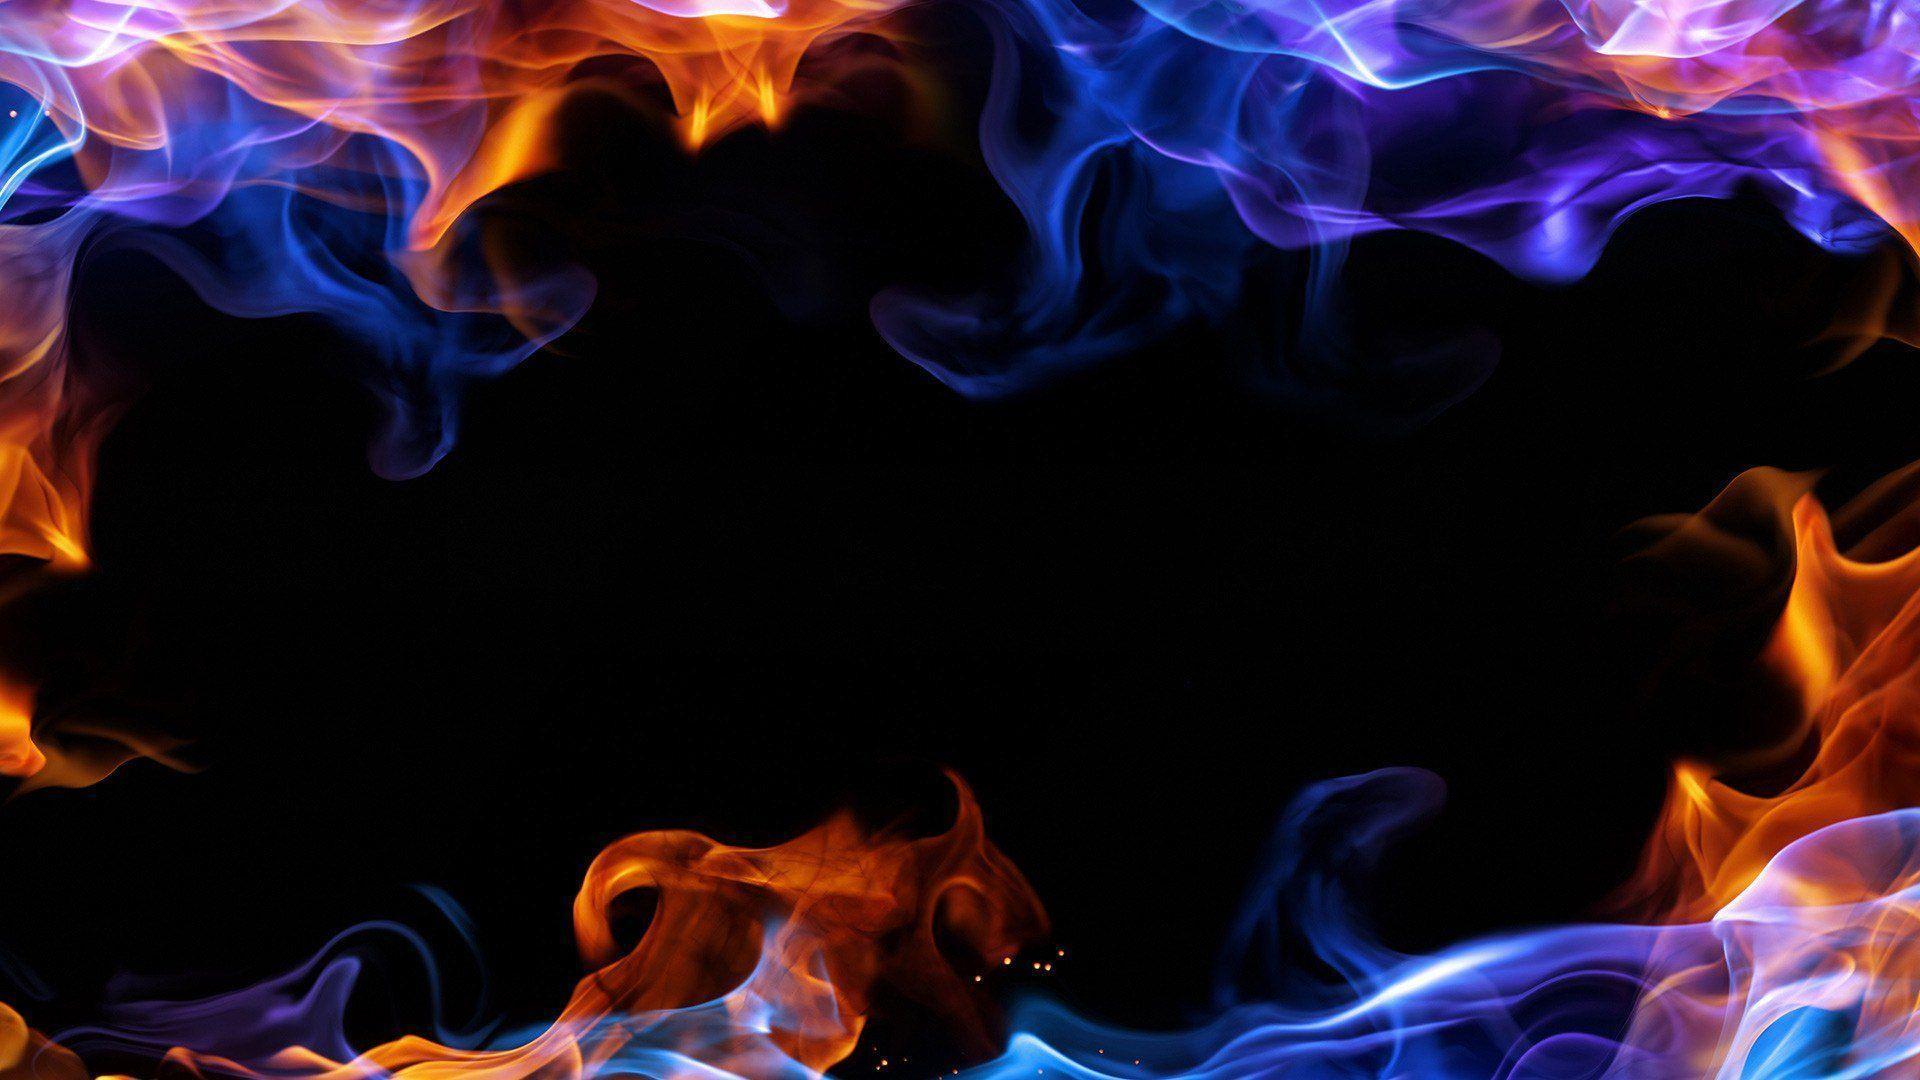 HD Flames On The Monitor Wallpaper